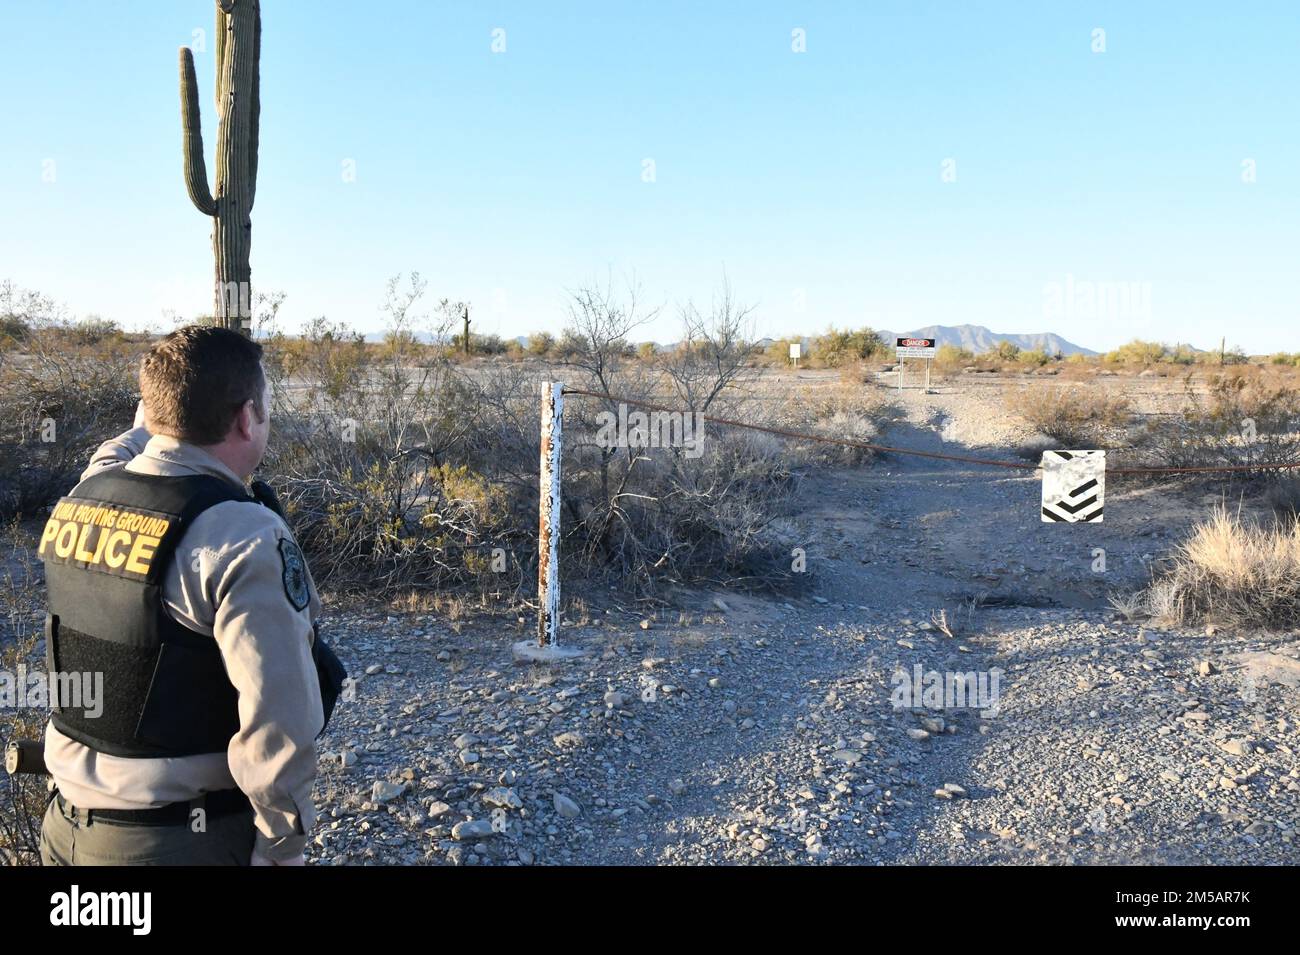 On March 24, Arizona Governor Douglas Ducey signed a bill authorizing concurrent criminal jurisdiction on U.S. Army Yuma Proving Ground (YPG). The change to concurrent jurisdiction will change the way traffic violations, trespassing, and illegal dumping are punished. Prior to the change, YPG Police only had the authority to issue DD Form 1408s, which have no penalty or deterrence associated with them for individuals who are unaffiliated with the Department of Defense. Now, the YPG Police will be empowered to issue Central Violations Bureau citations, which do have financial penalties associate Stock Photo